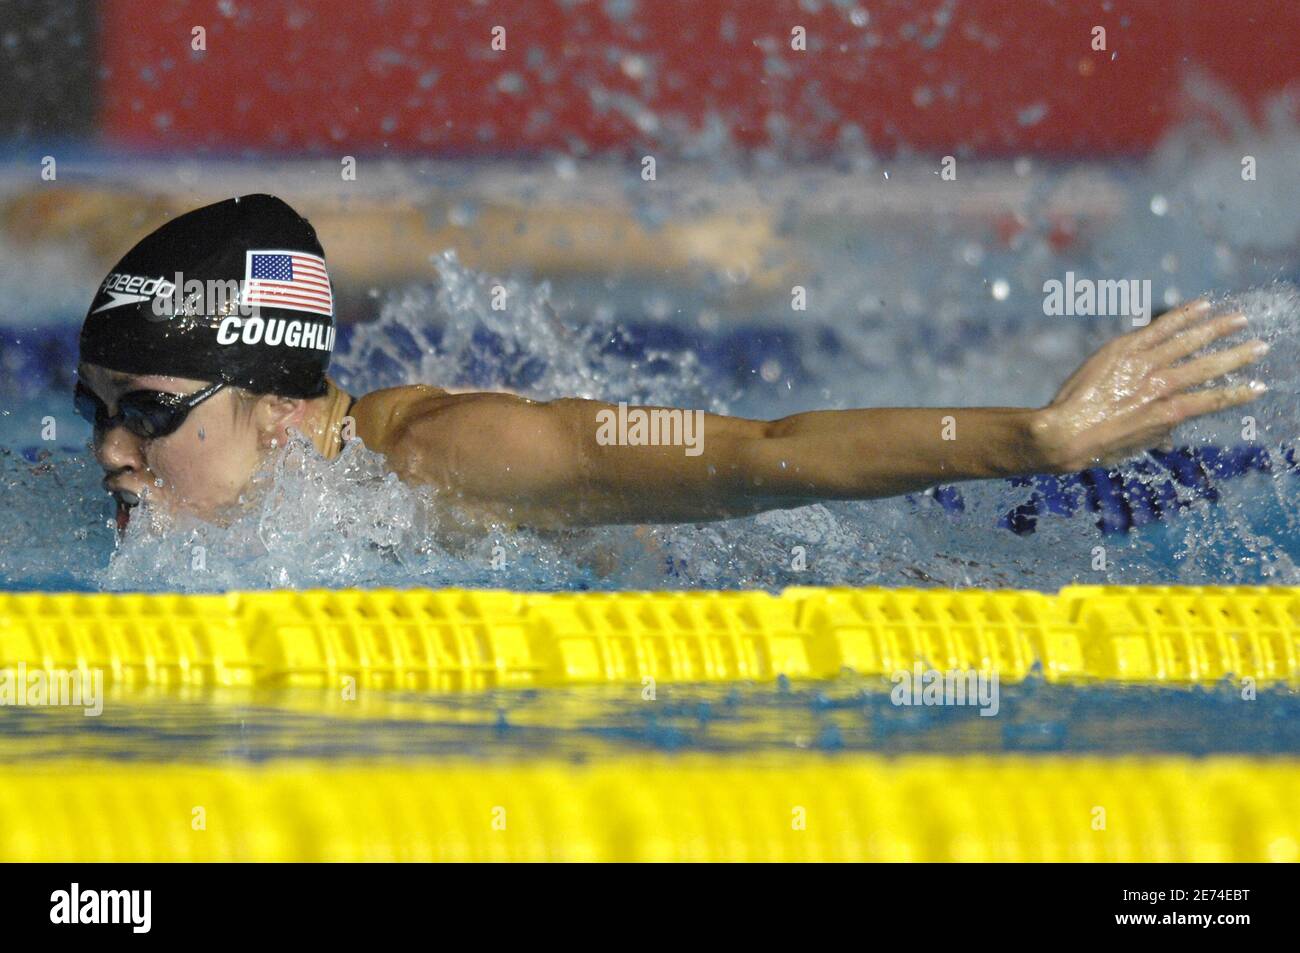 USA's Natalie Coughlin wins the bronze medal on women's 100 meters butterfly final during the 12th FINA World Championships, at the Rod Laver Arena in Melbourne, Australia on March 26, 2007. Photo by Nicolas Gouhier/Cameleon/ABACAPRESS.COM Stock Photo